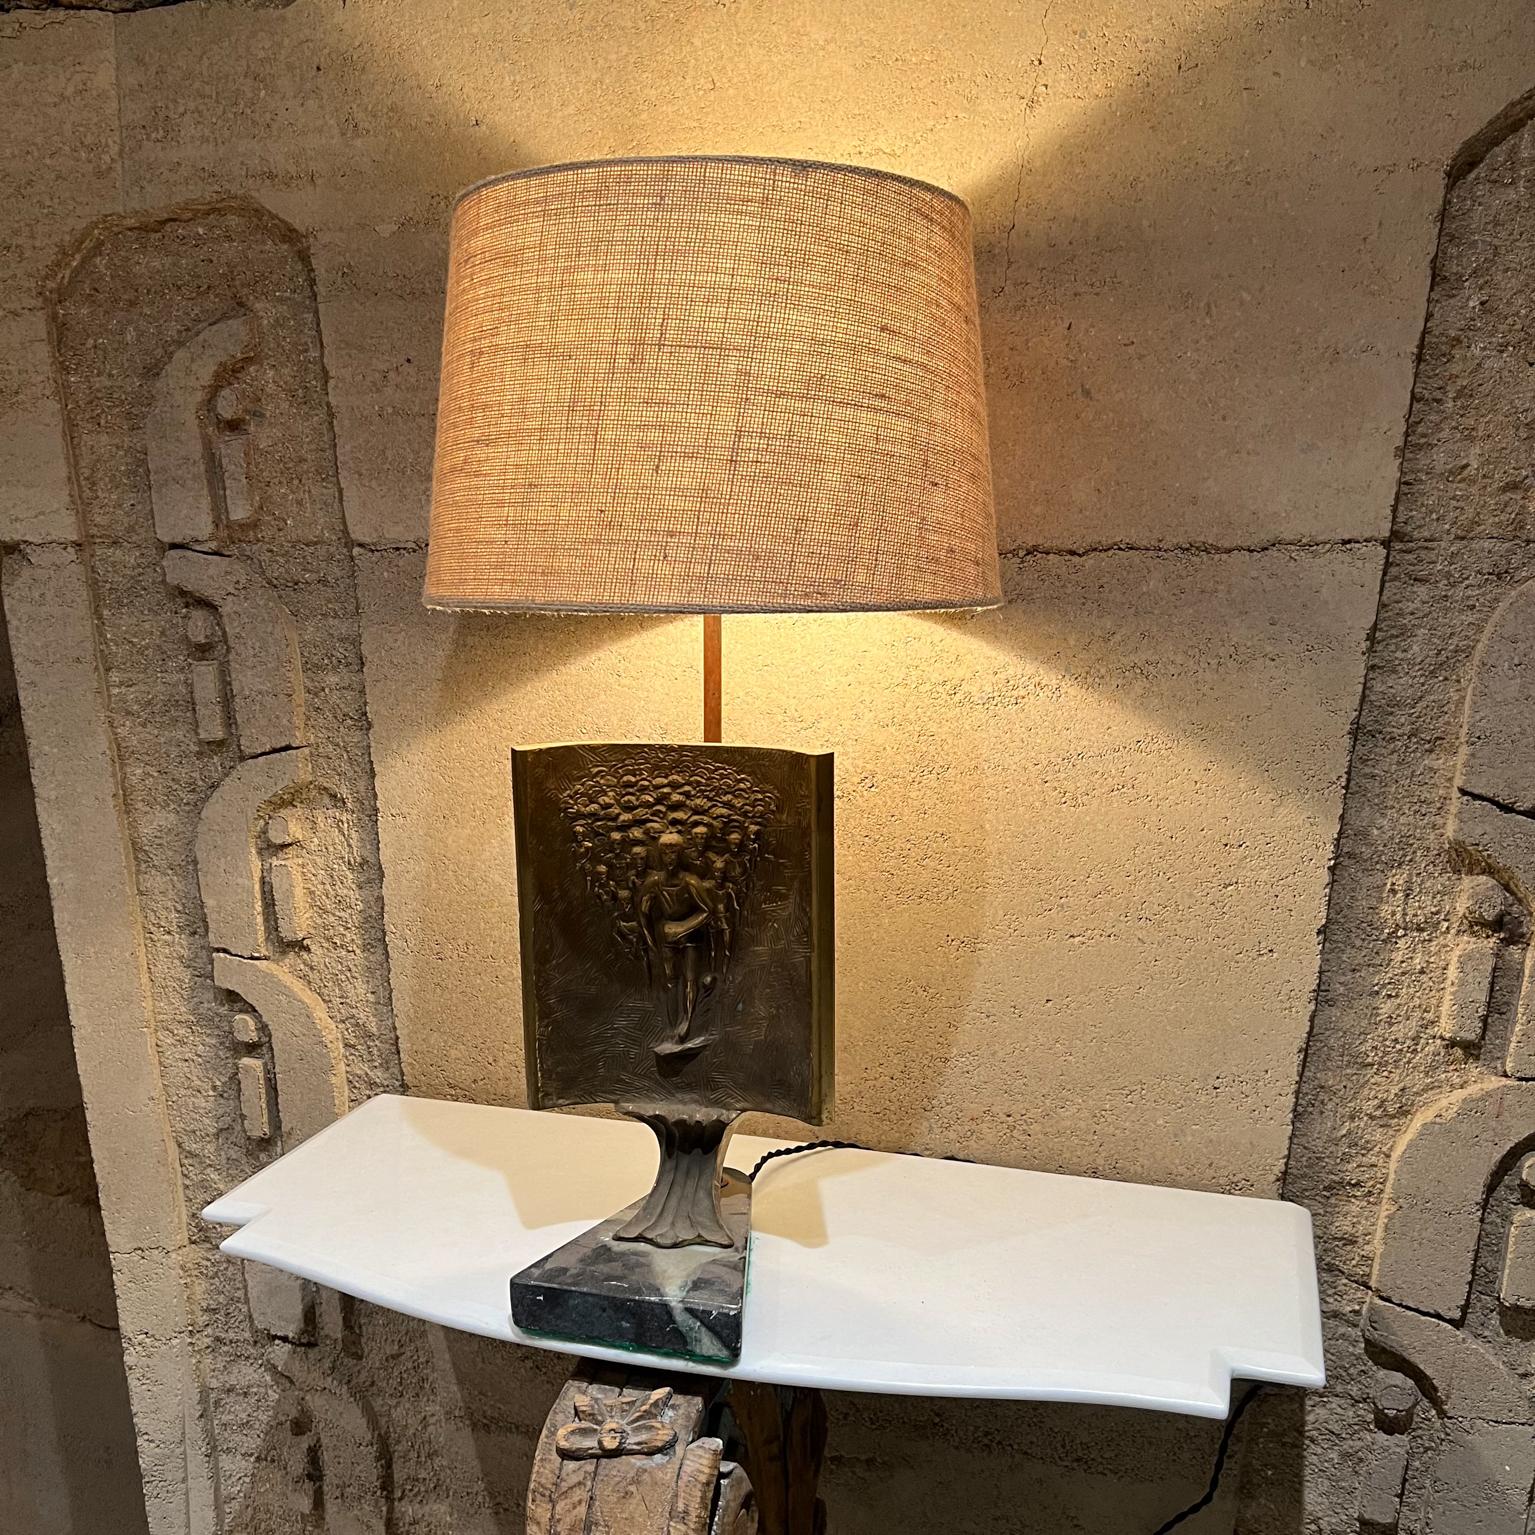 Table Lamp Art 1960s
Italian Table Lamp with Bronze sculpture on Italian Marble Base, Modern ITALY 
Features new green marble base complements patinated bronze
Sculpture from Italy circa 1960s. In the style of Giacometti.
No stamp